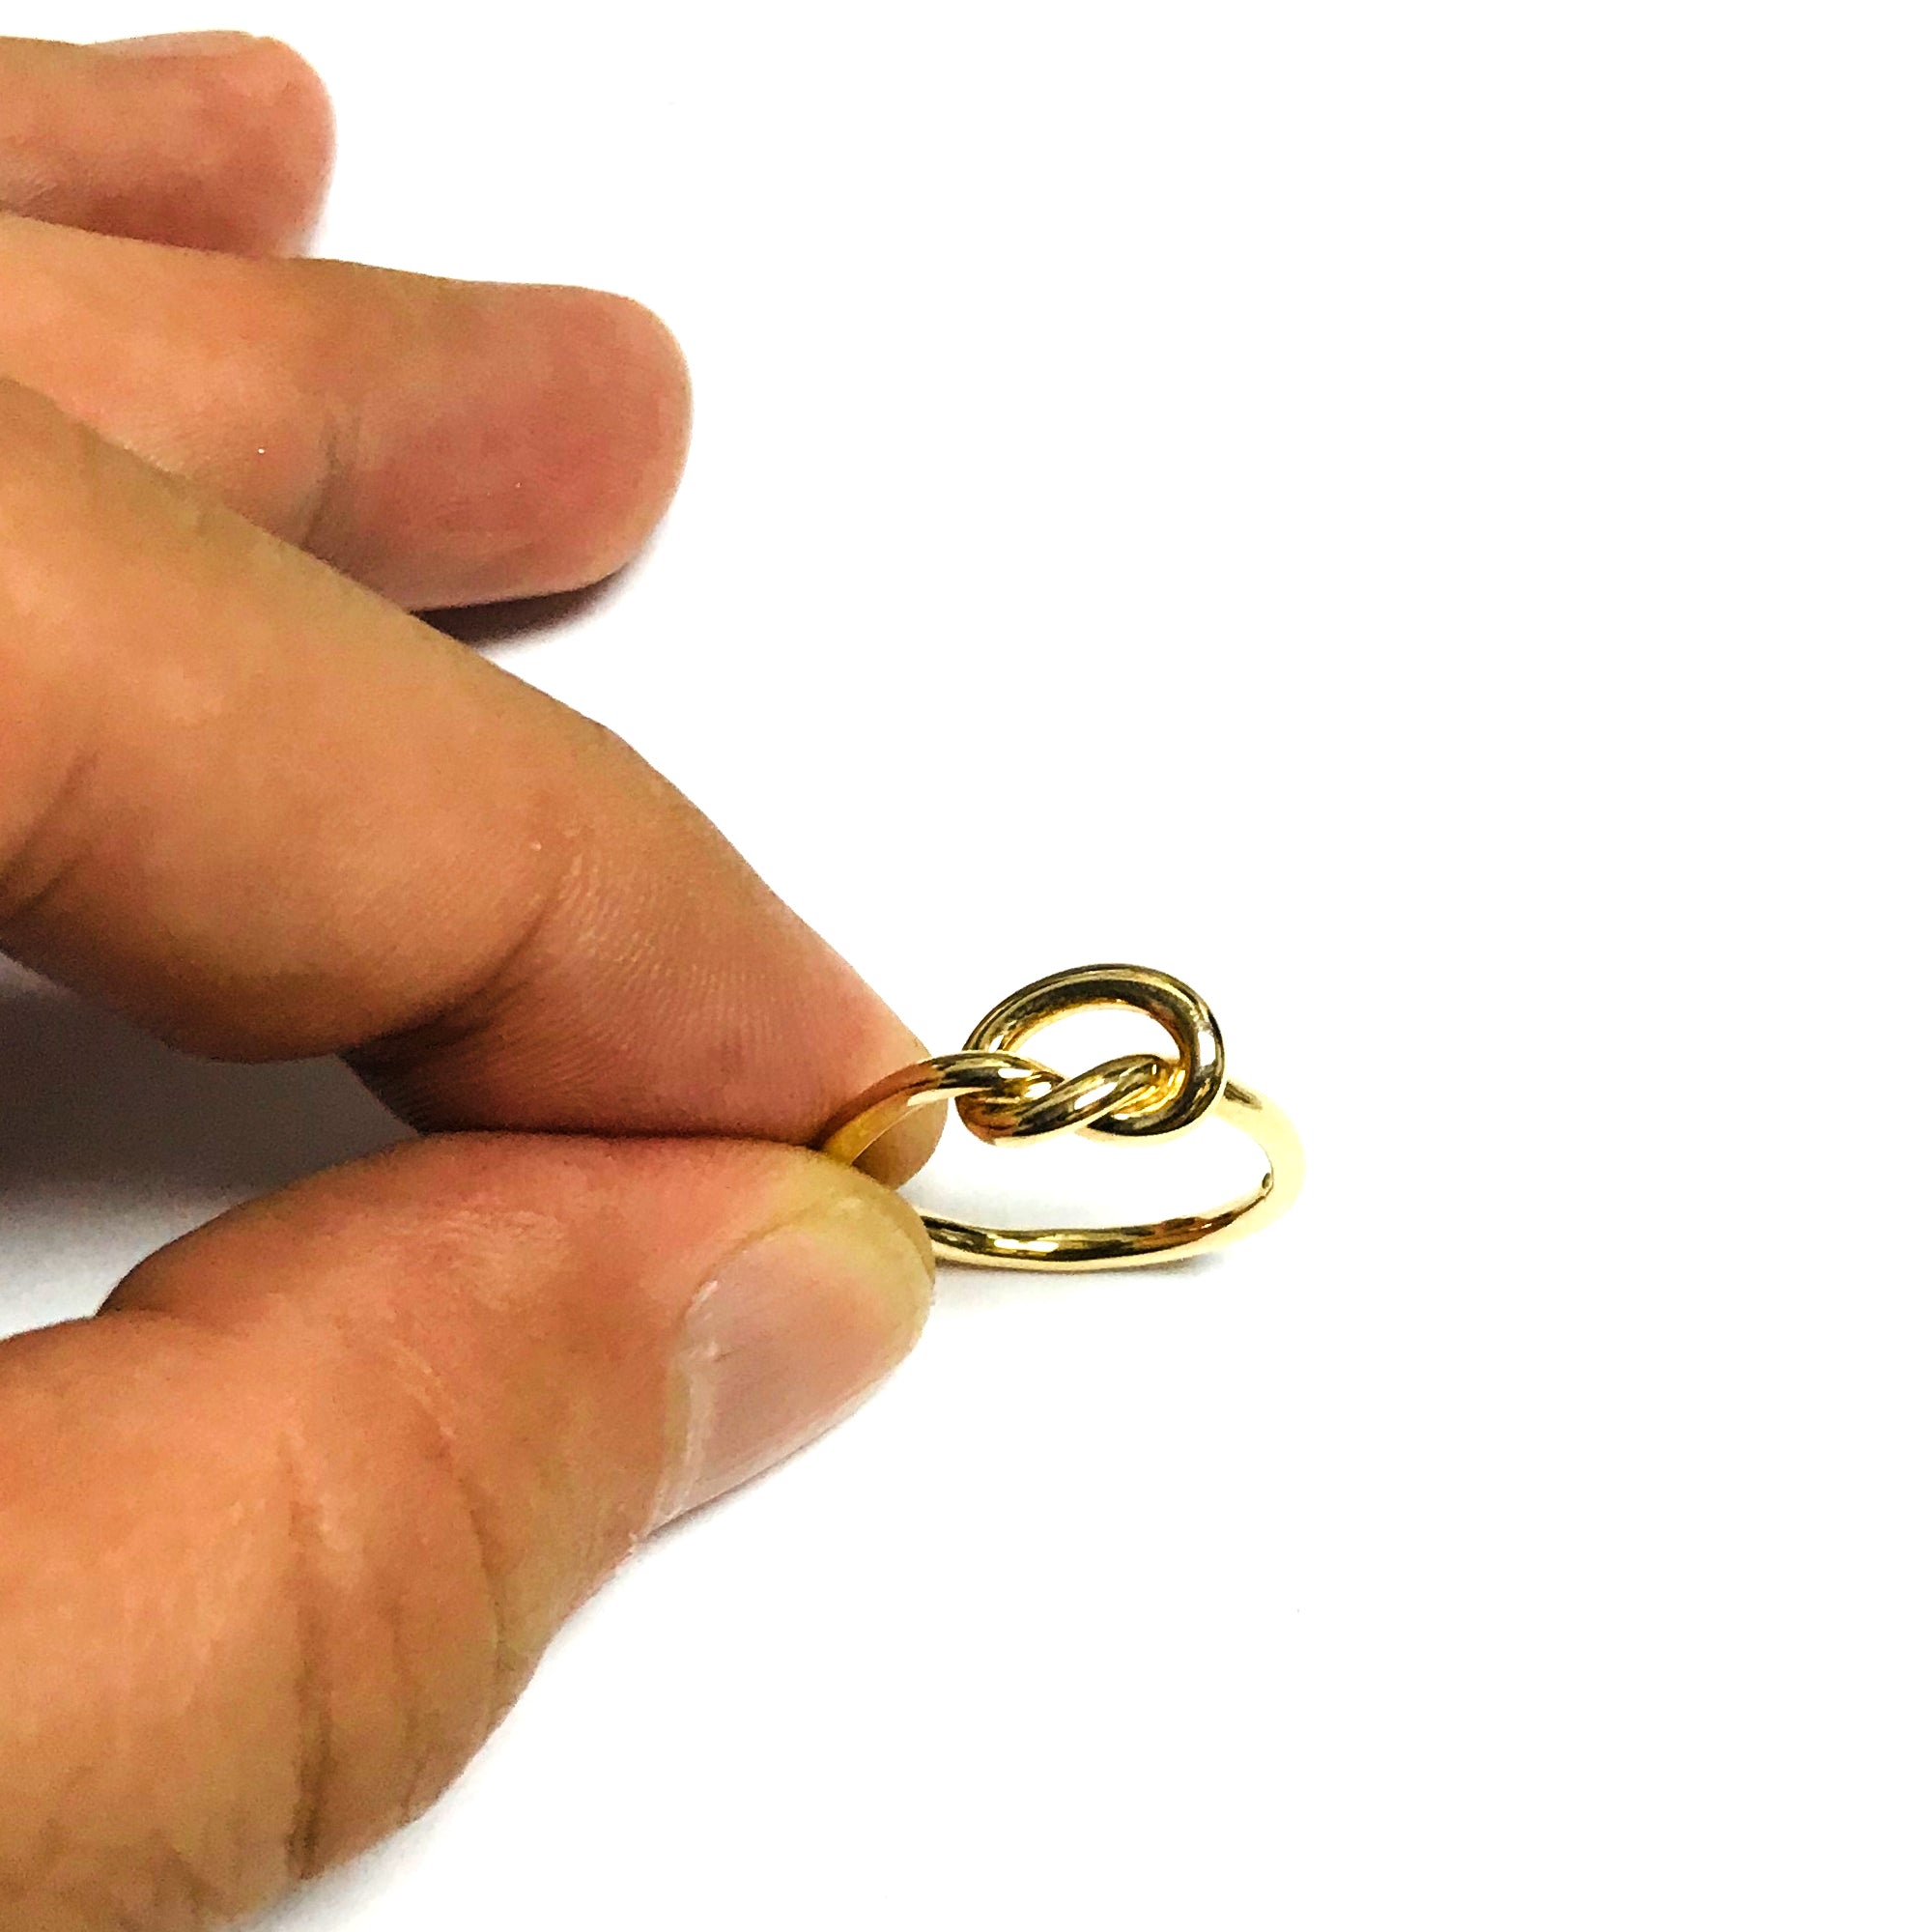 14K Yellow Gold Lovers Love Knot Pretzel Ring, Size 7